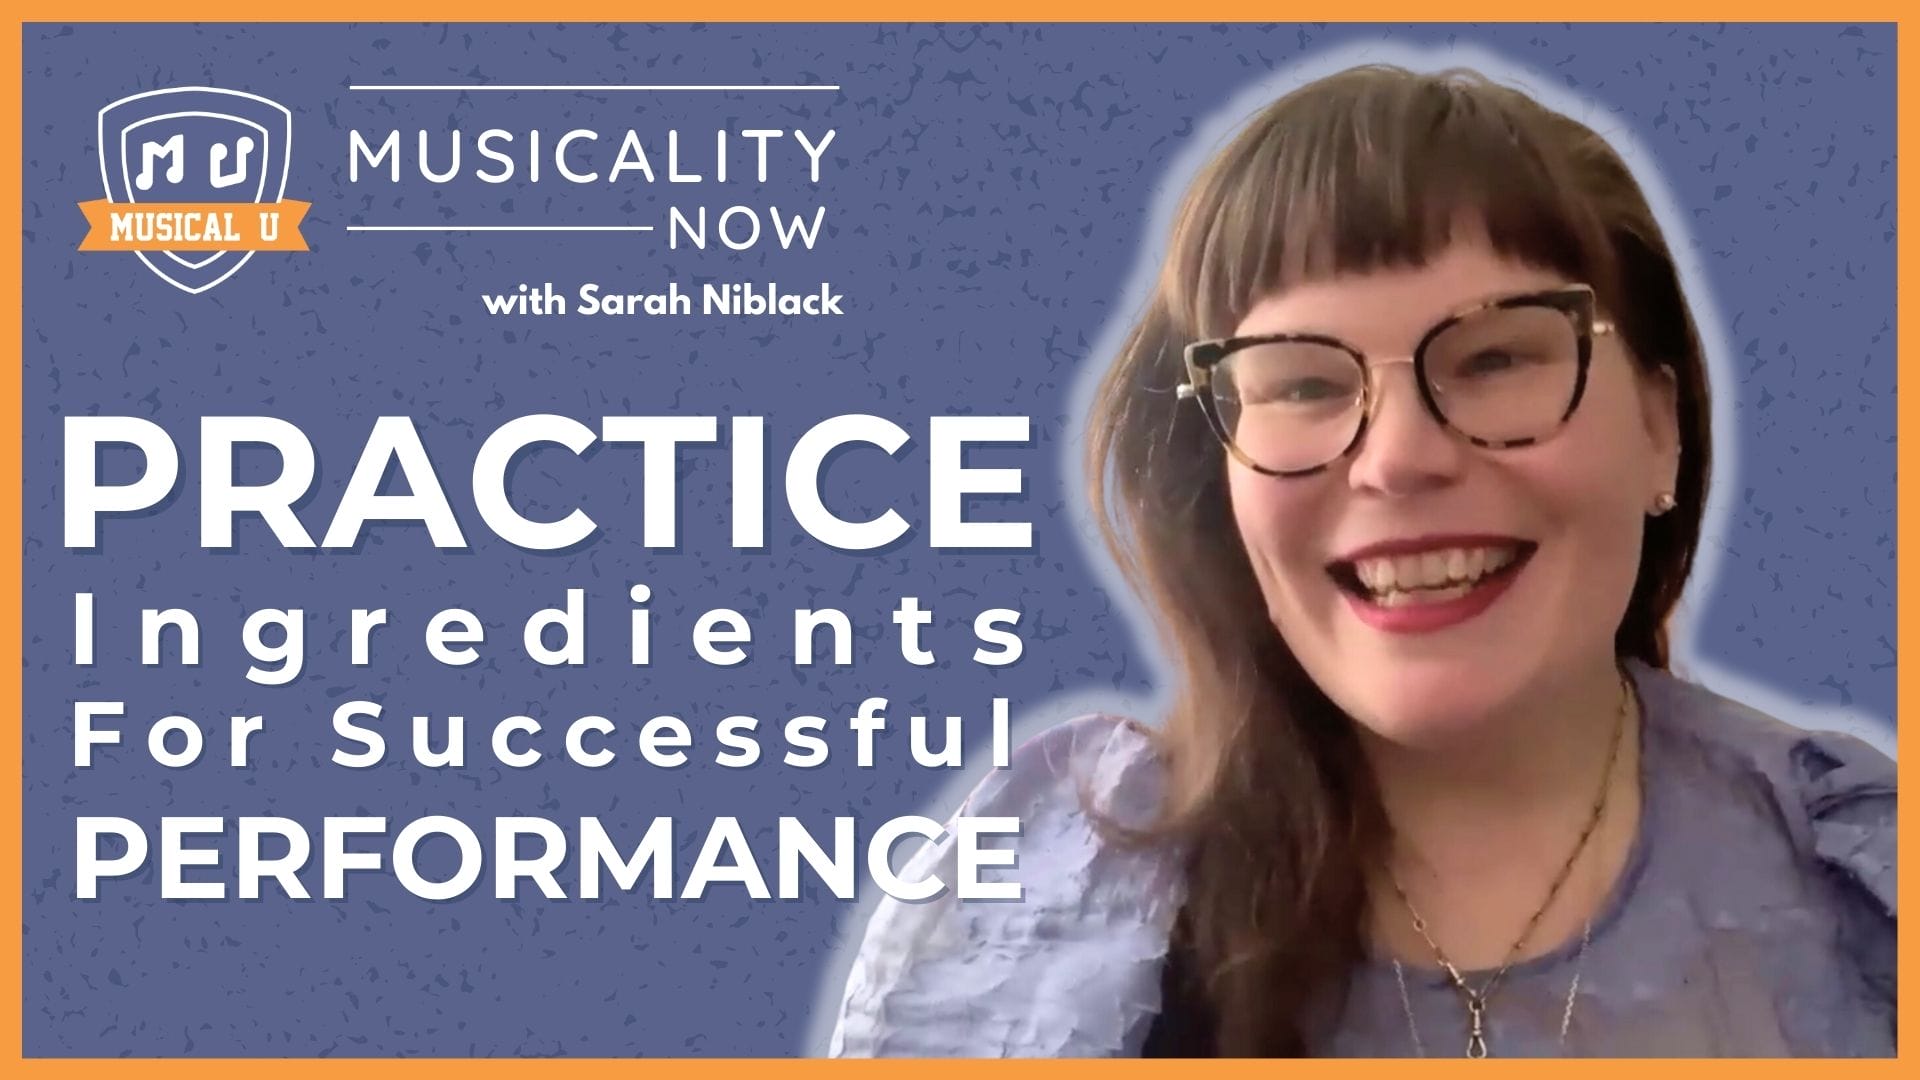 The Practice Ingredients For Successful Performance, with Sarah Niblack